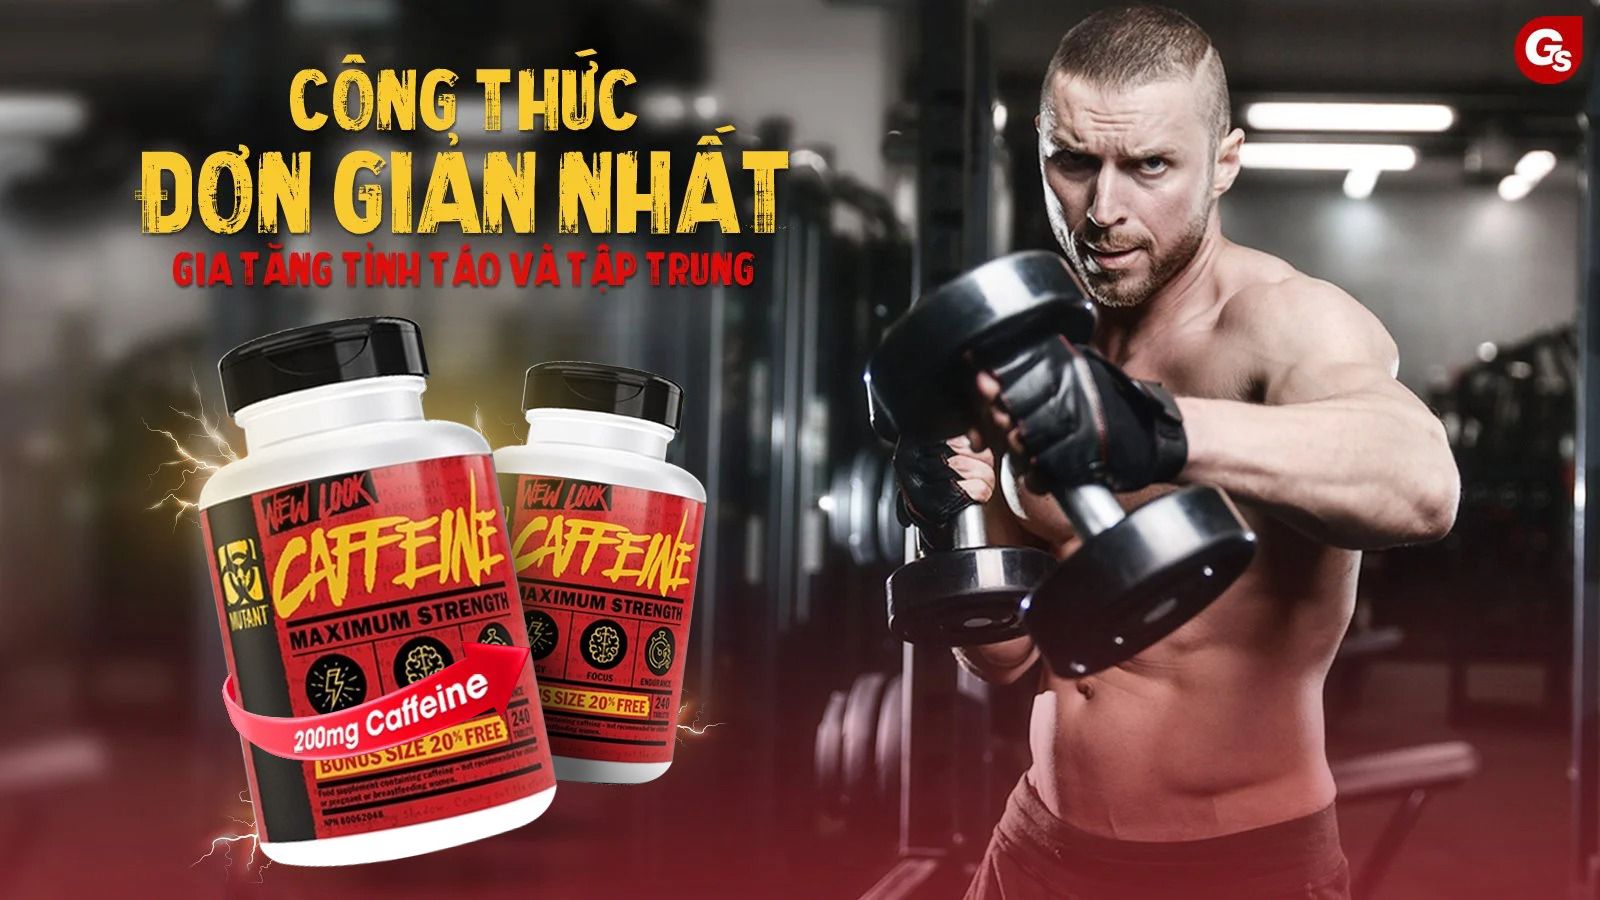 mutant-caffeine-tang-tap-trung-gymstore